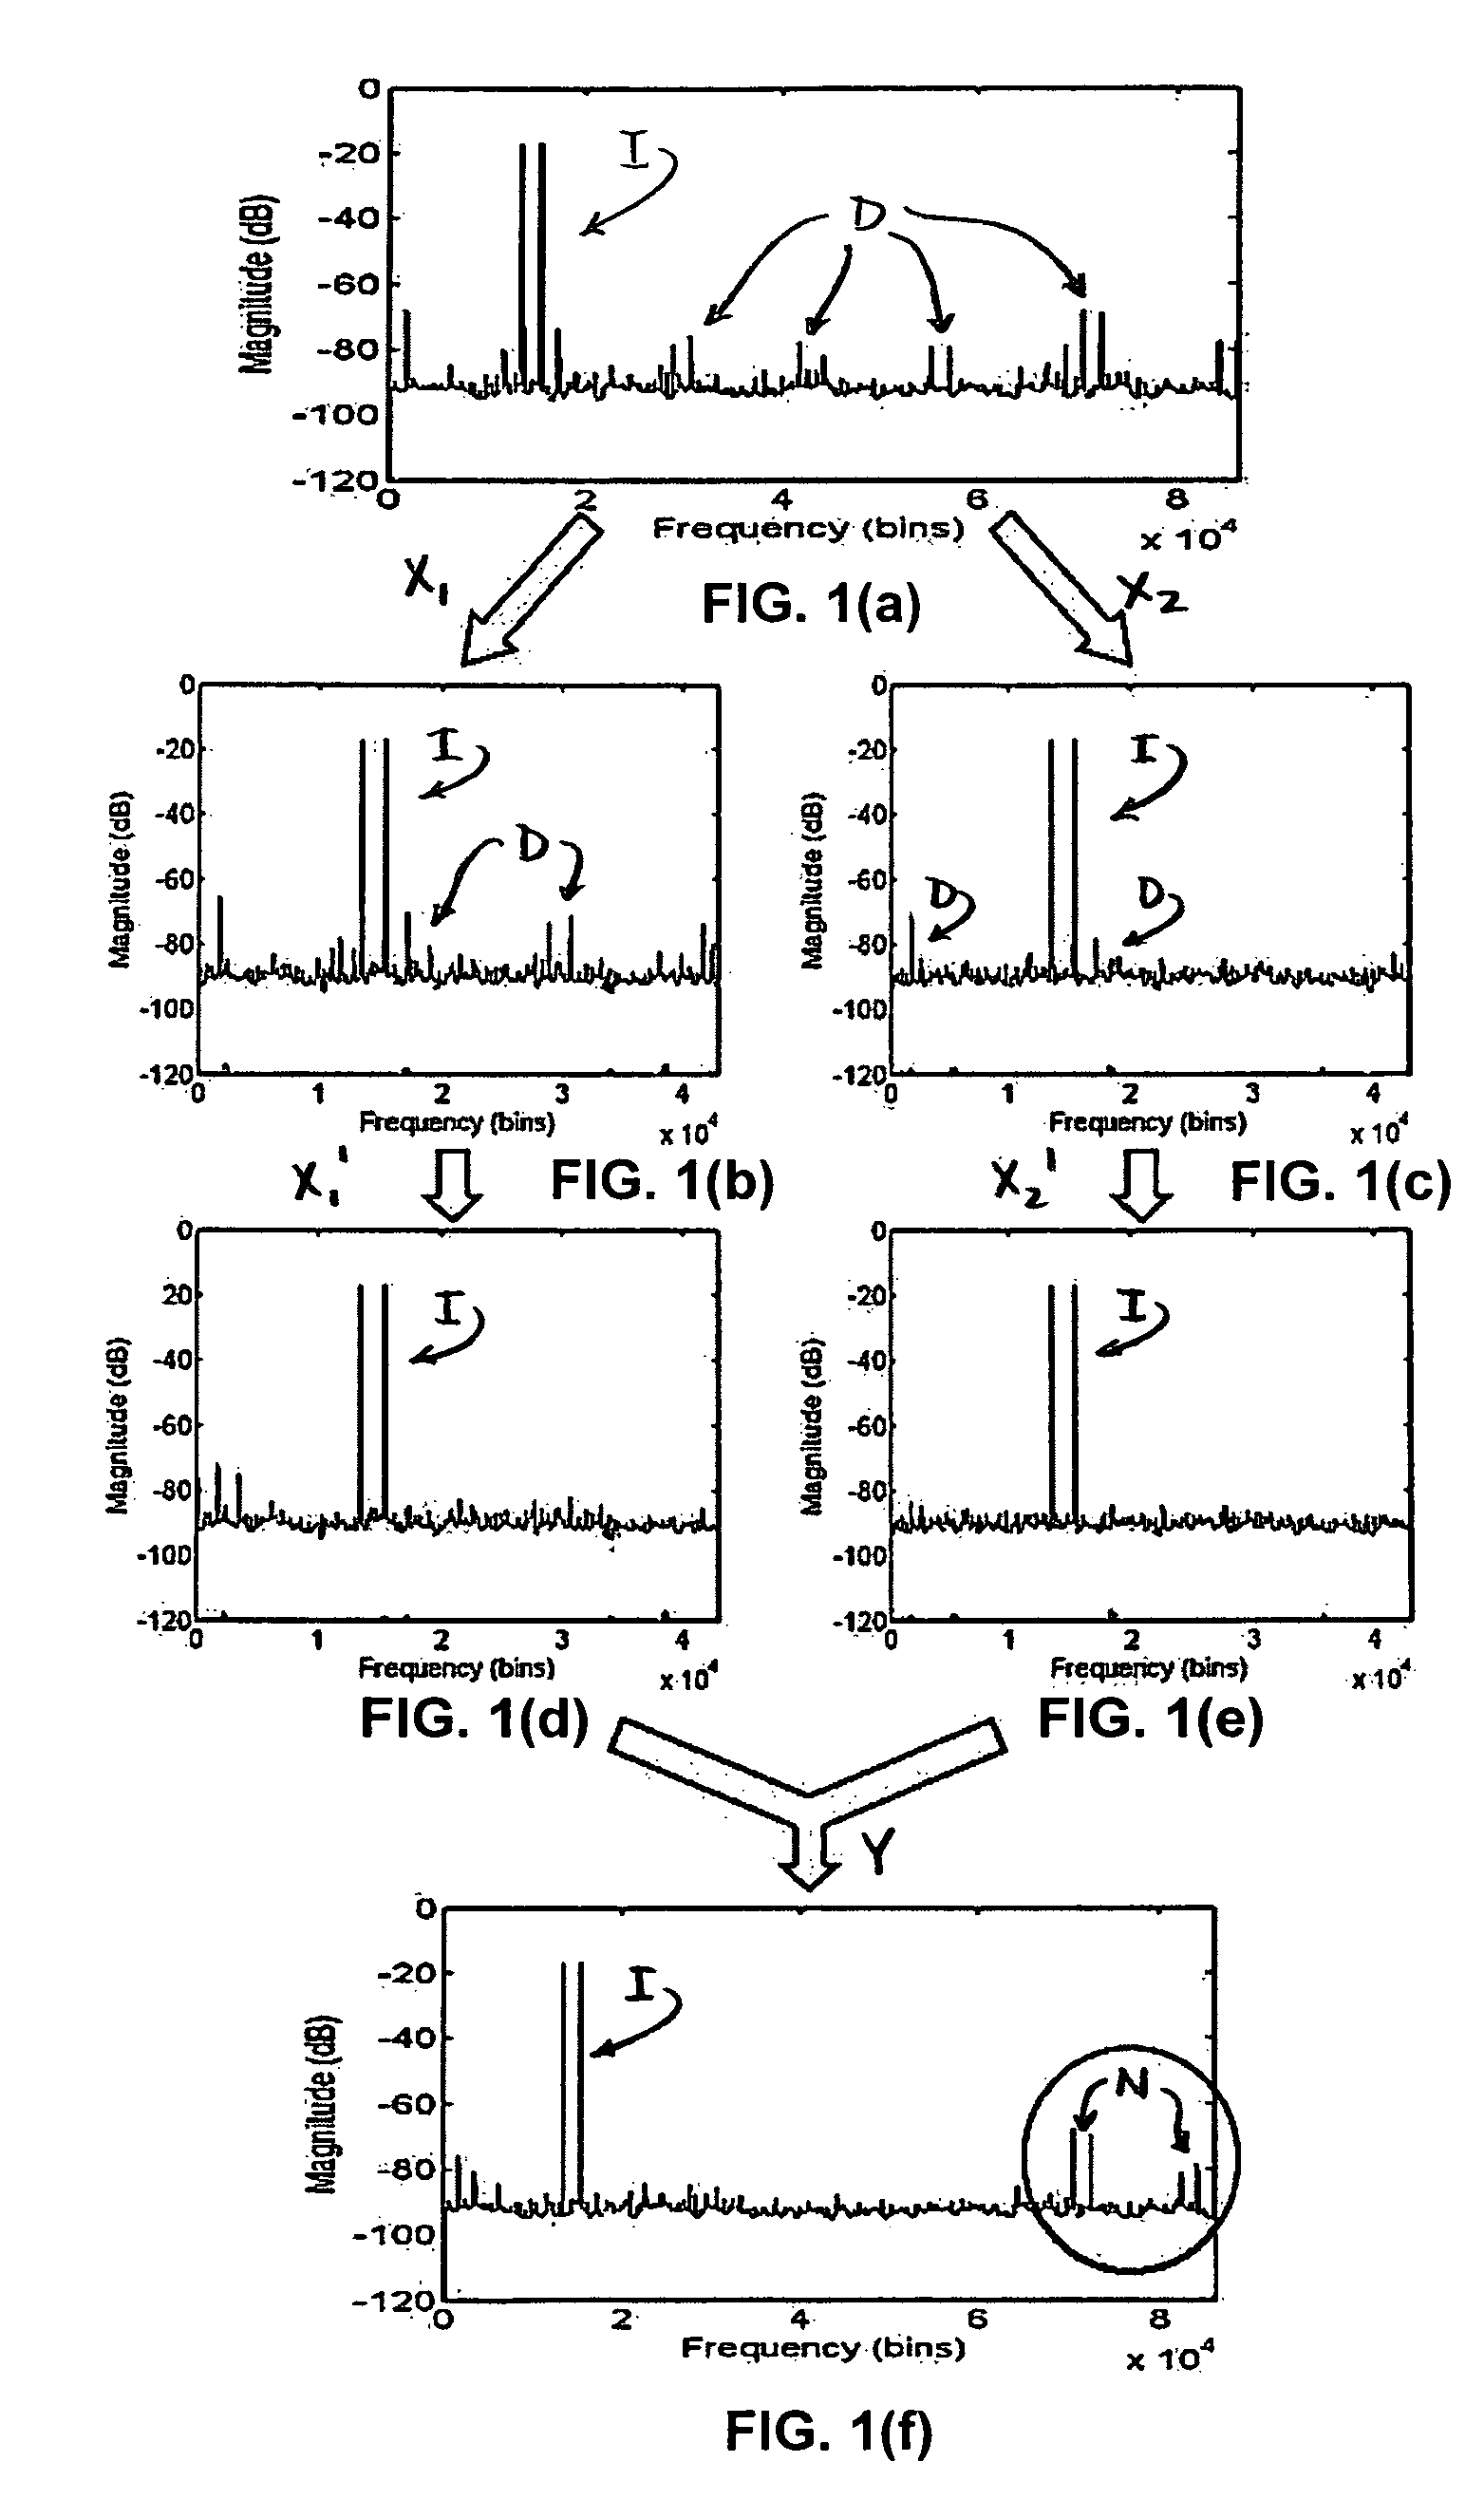 System and method of multi-channel signal calibration